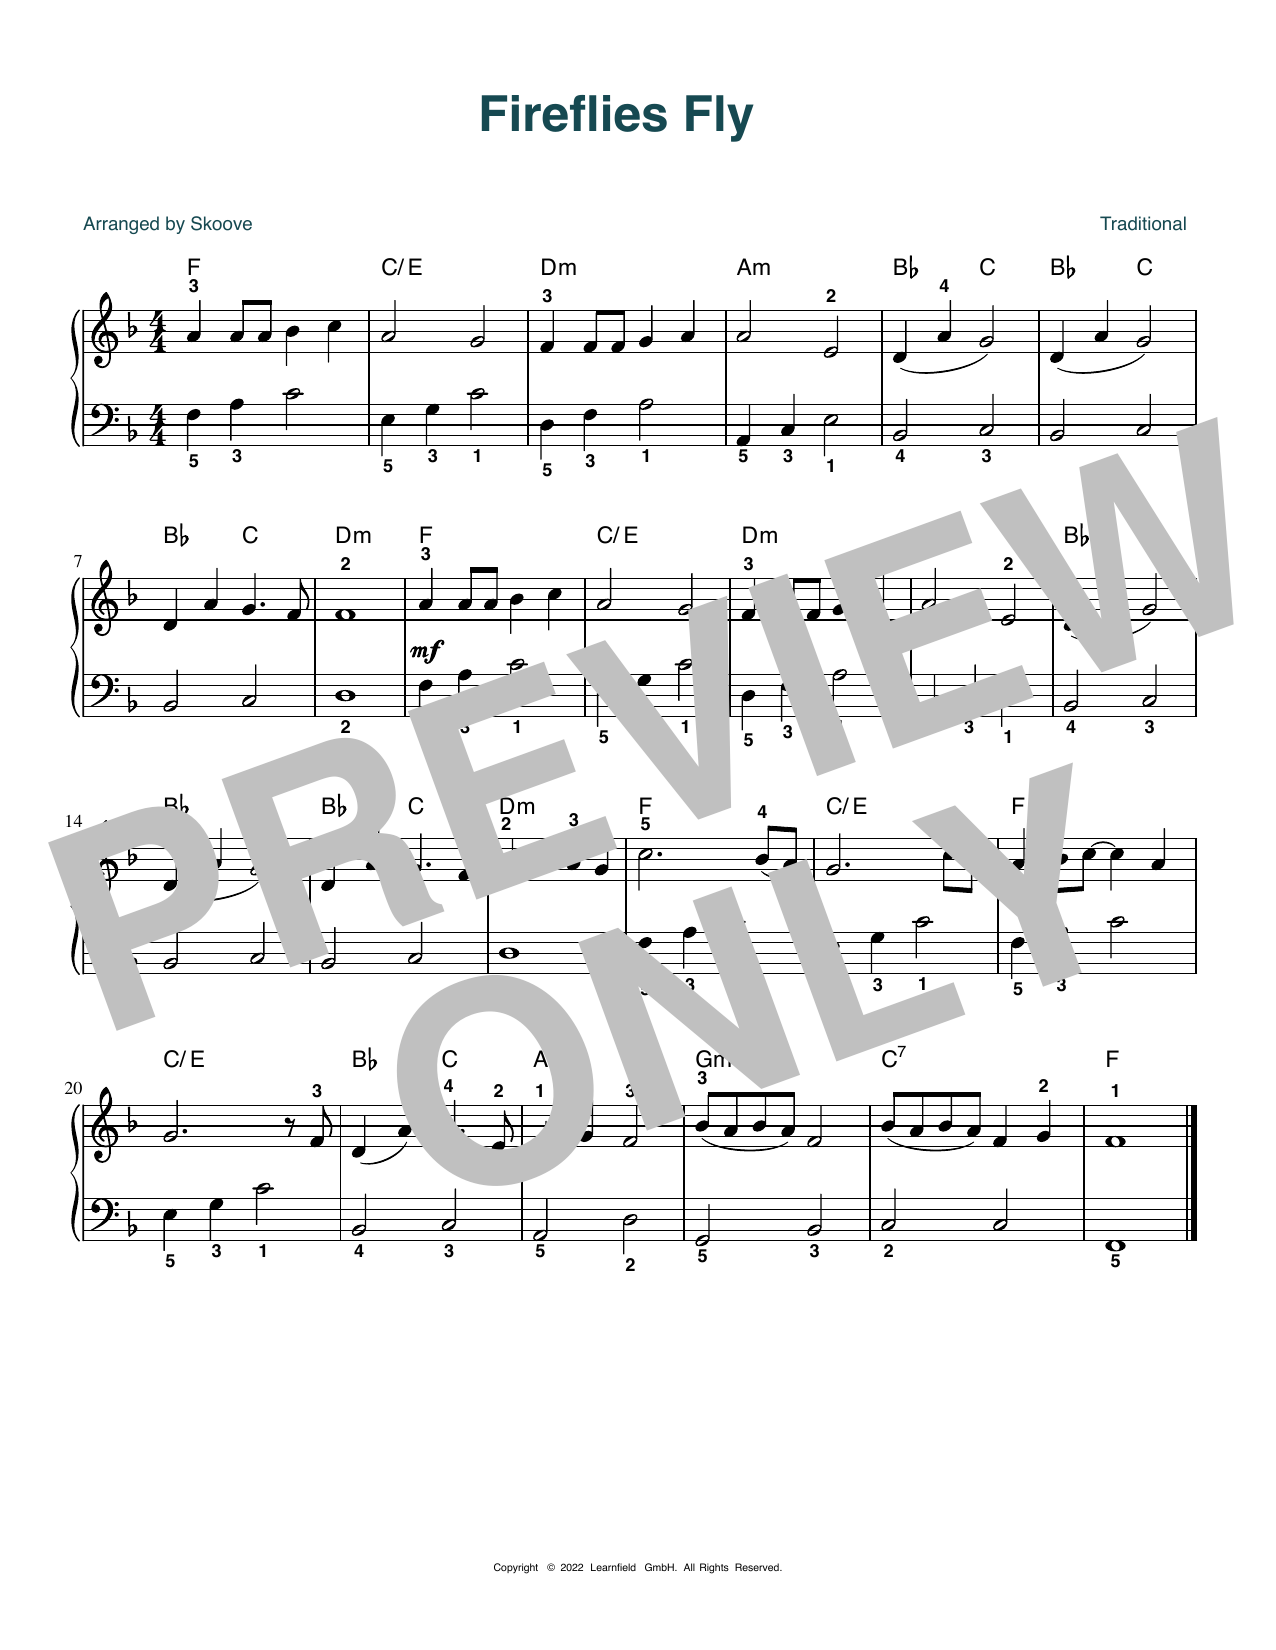 Download Traditional Fireflies Fly (arr. Skoove) Sheet Music